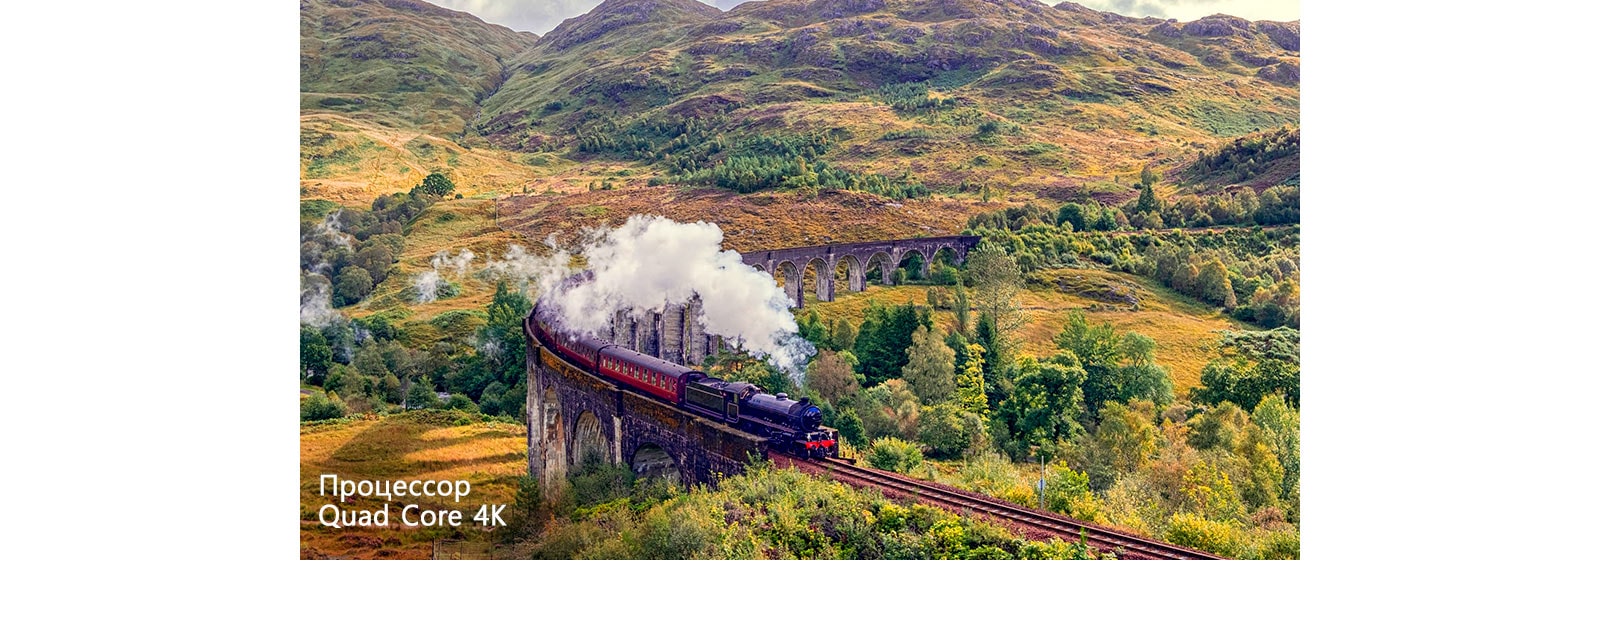 A steam locomotive with steam coming out of a chimney on a railway in the mountains with the Quad Core 4K processor logo at the bottom left.